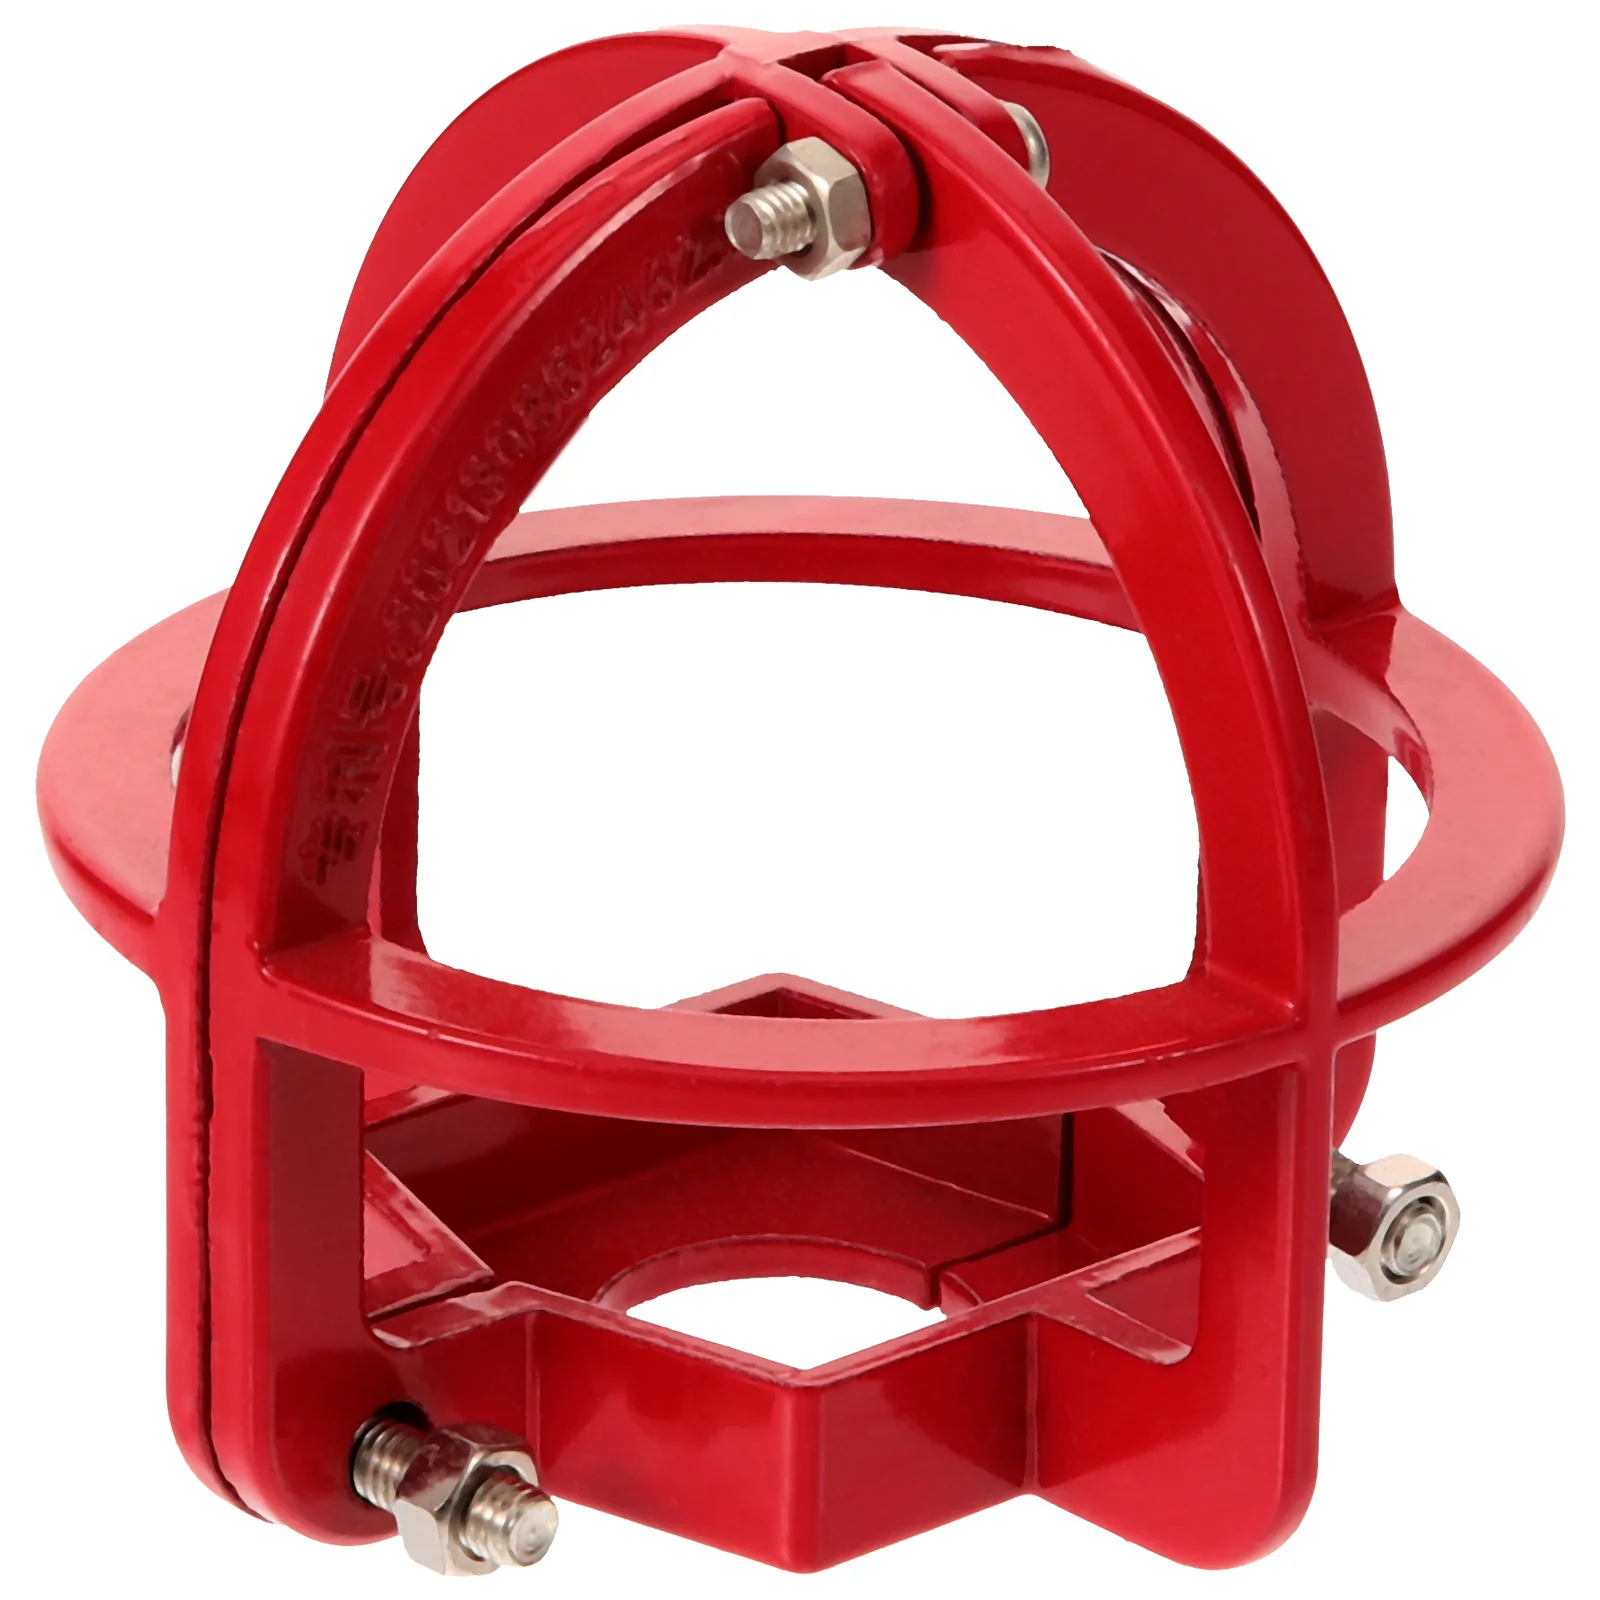 

Fire Head for Protecting Flush Mount Sprinkler Protection Frame Covers Residential